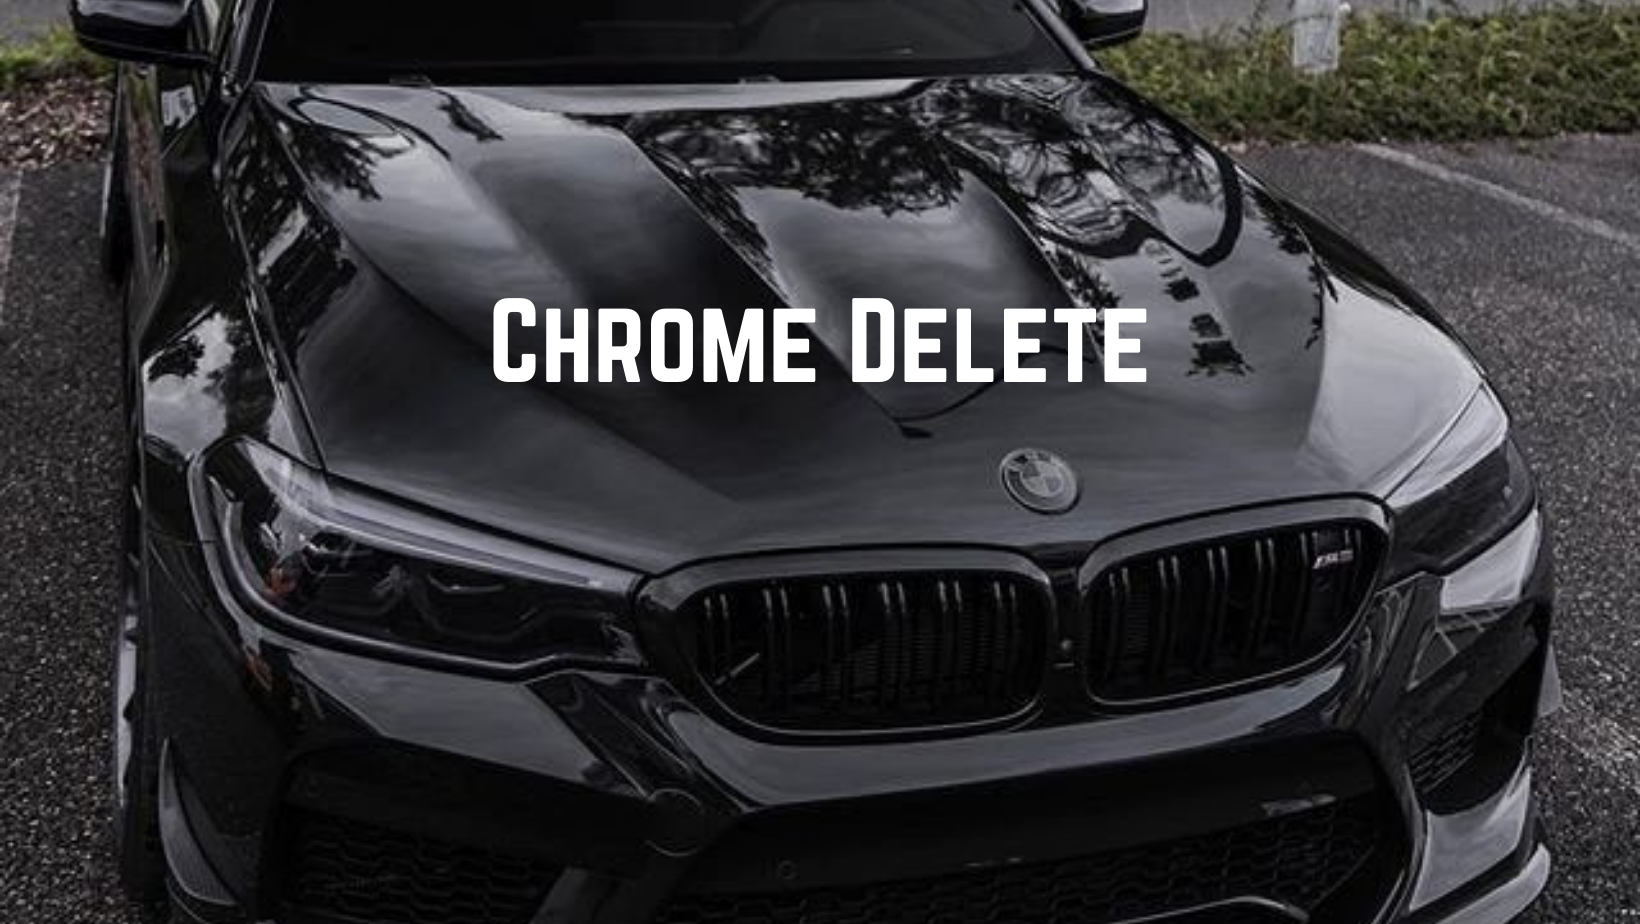 Know About 3M CHROME DELETE